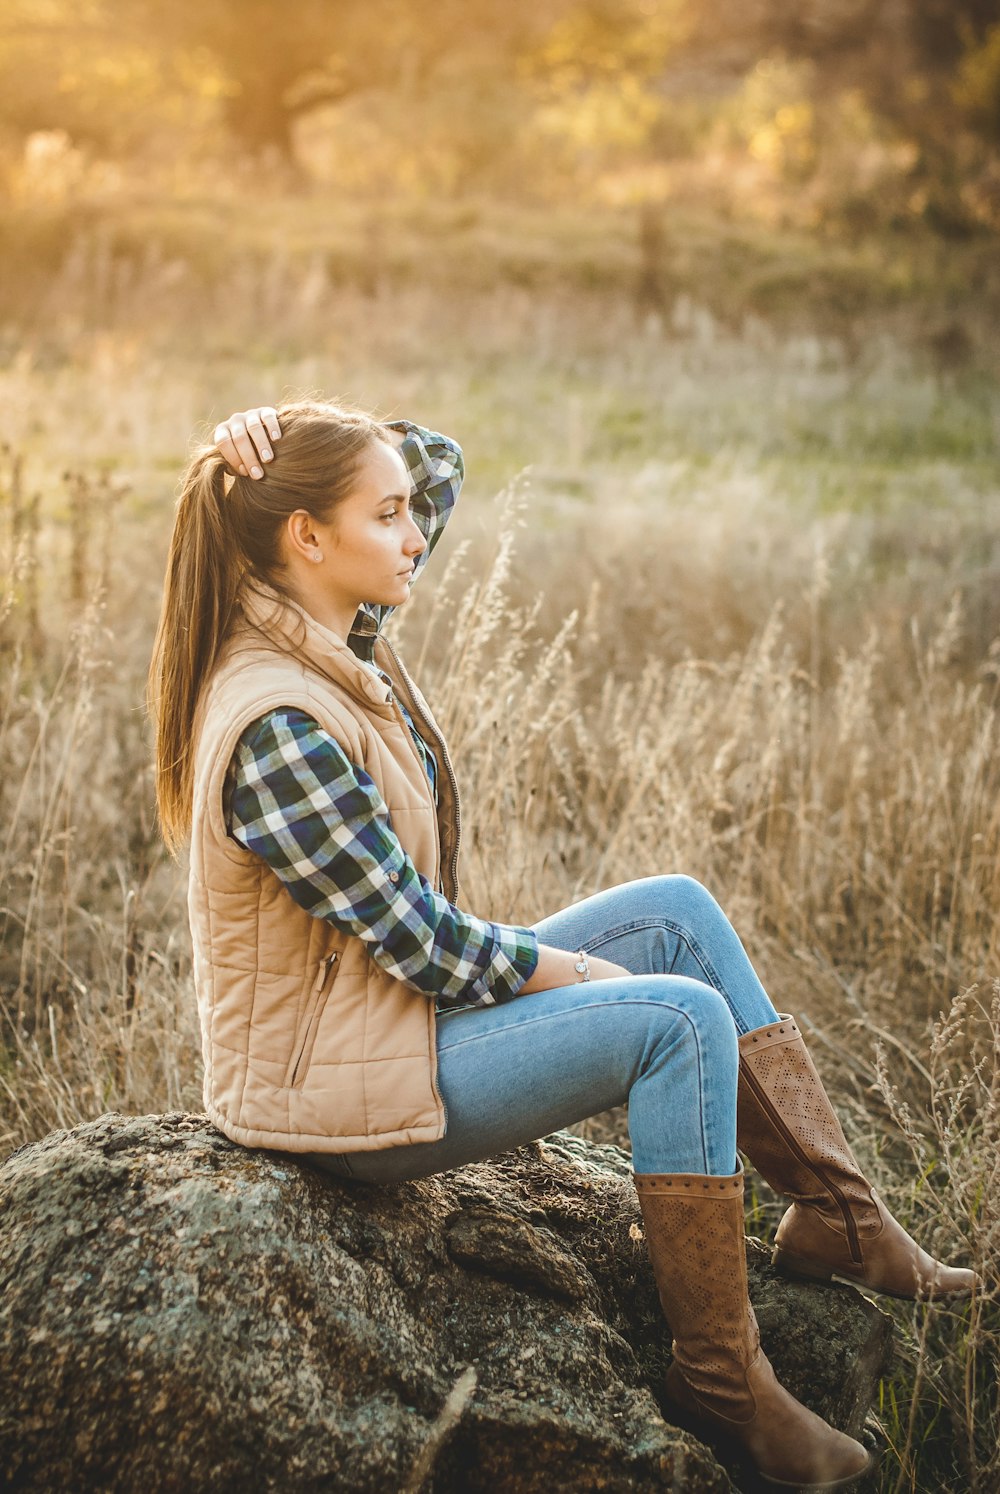 woman in blue and white plaid dress shirt and blue denim jeans sitting on rock during